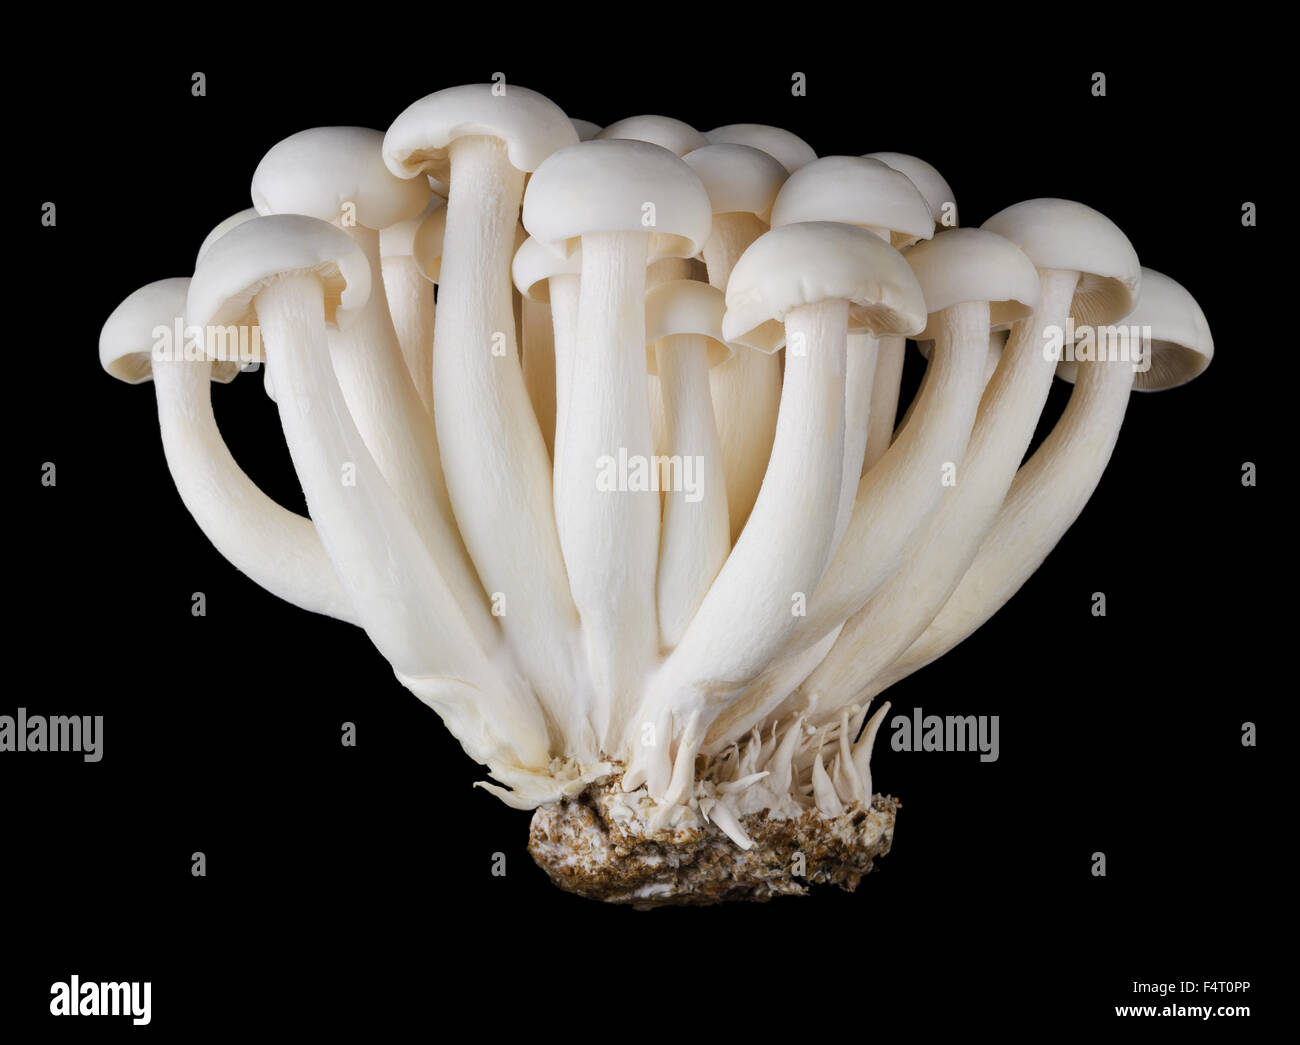 Bunapi shimeji, white beech mushrooms, also called white clamshell mushrooms, an edible fungus on black background. Front view. Stock Photo